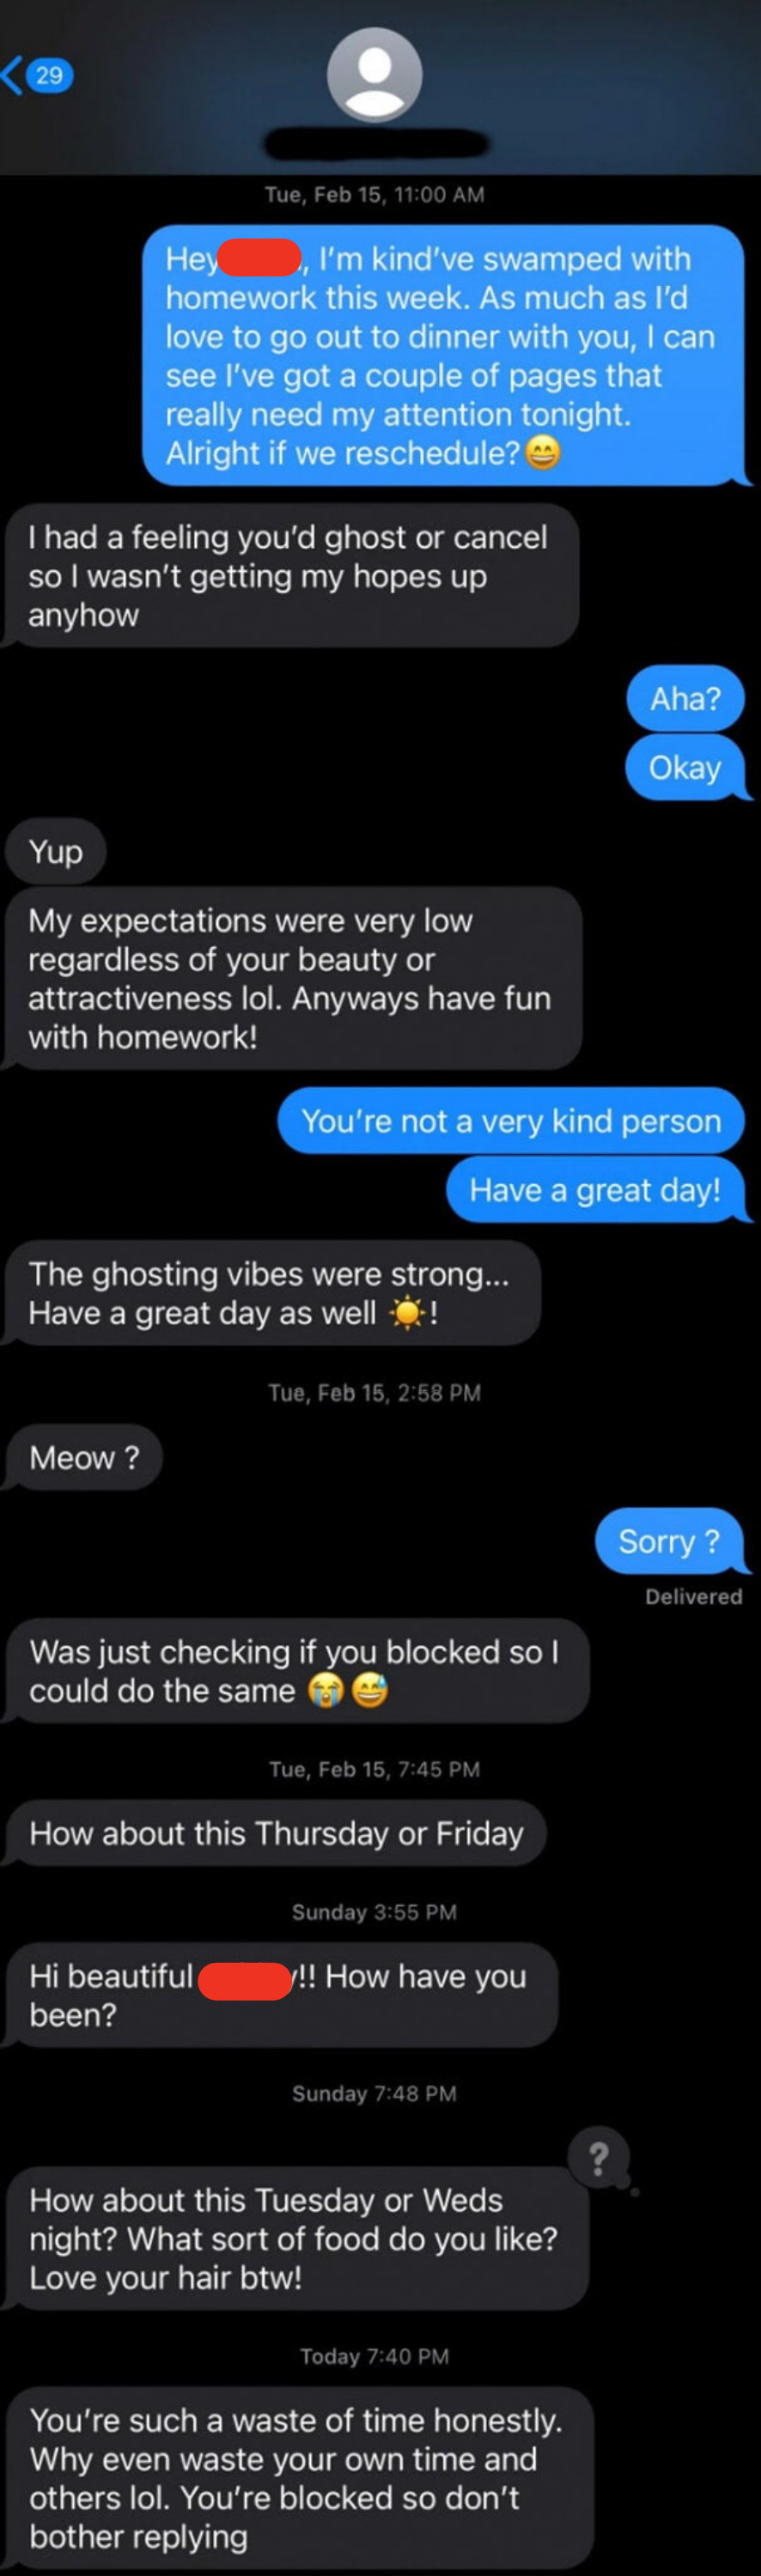 The woman says she has homework so needs to reschedule, the man says he was expecting her to ghost him, she calls him mean, he says he&#x27;s blocking her, then he asks her out again days later